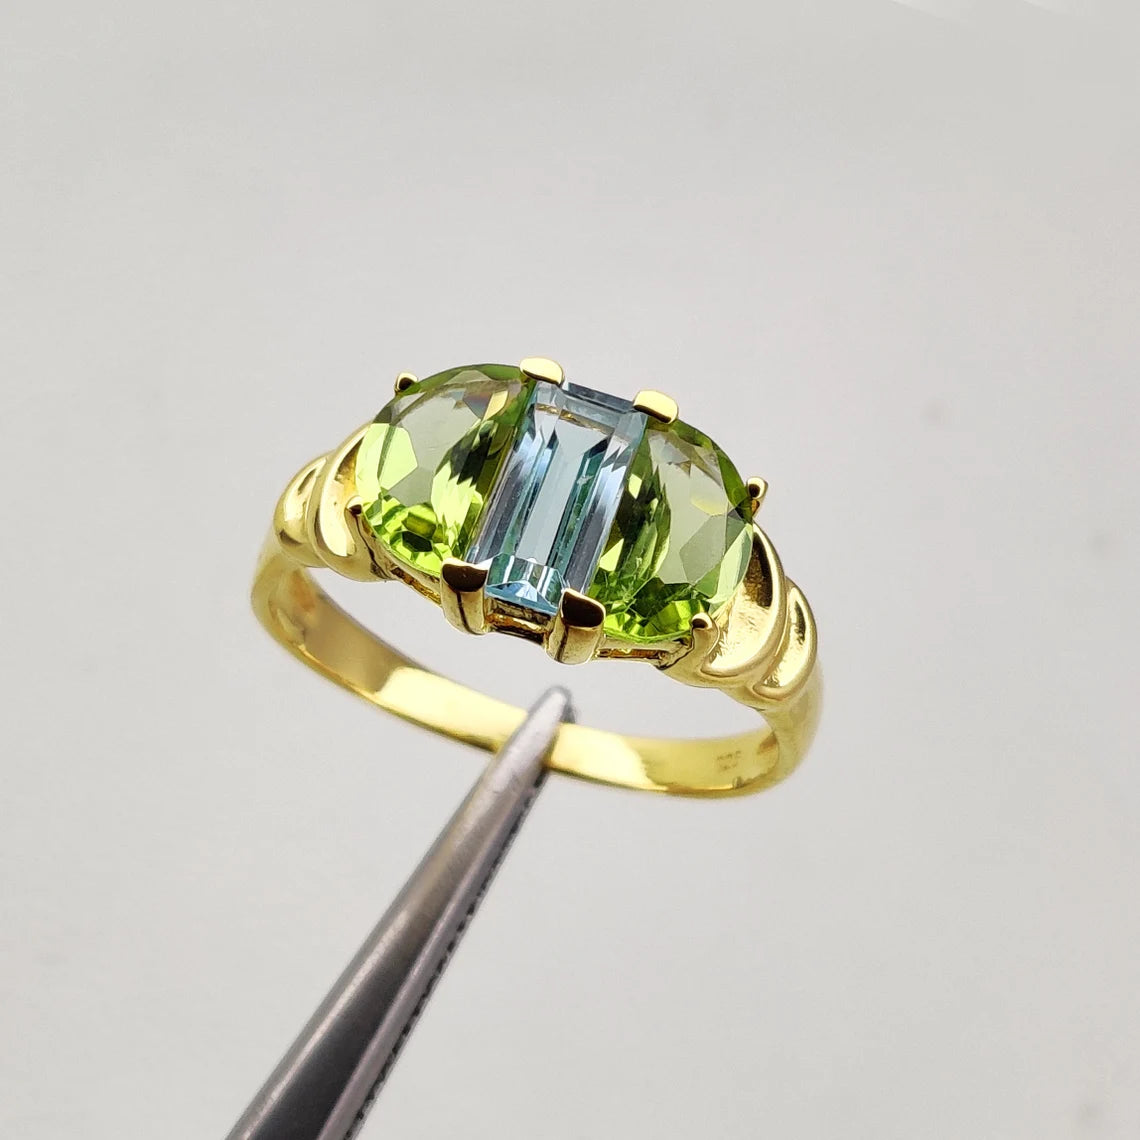 Blue Topaz Peridot Ring, Crescent Moon Ring, December August Birthstone, Unique Modern Ring, Sterling Silver, Gift For Her